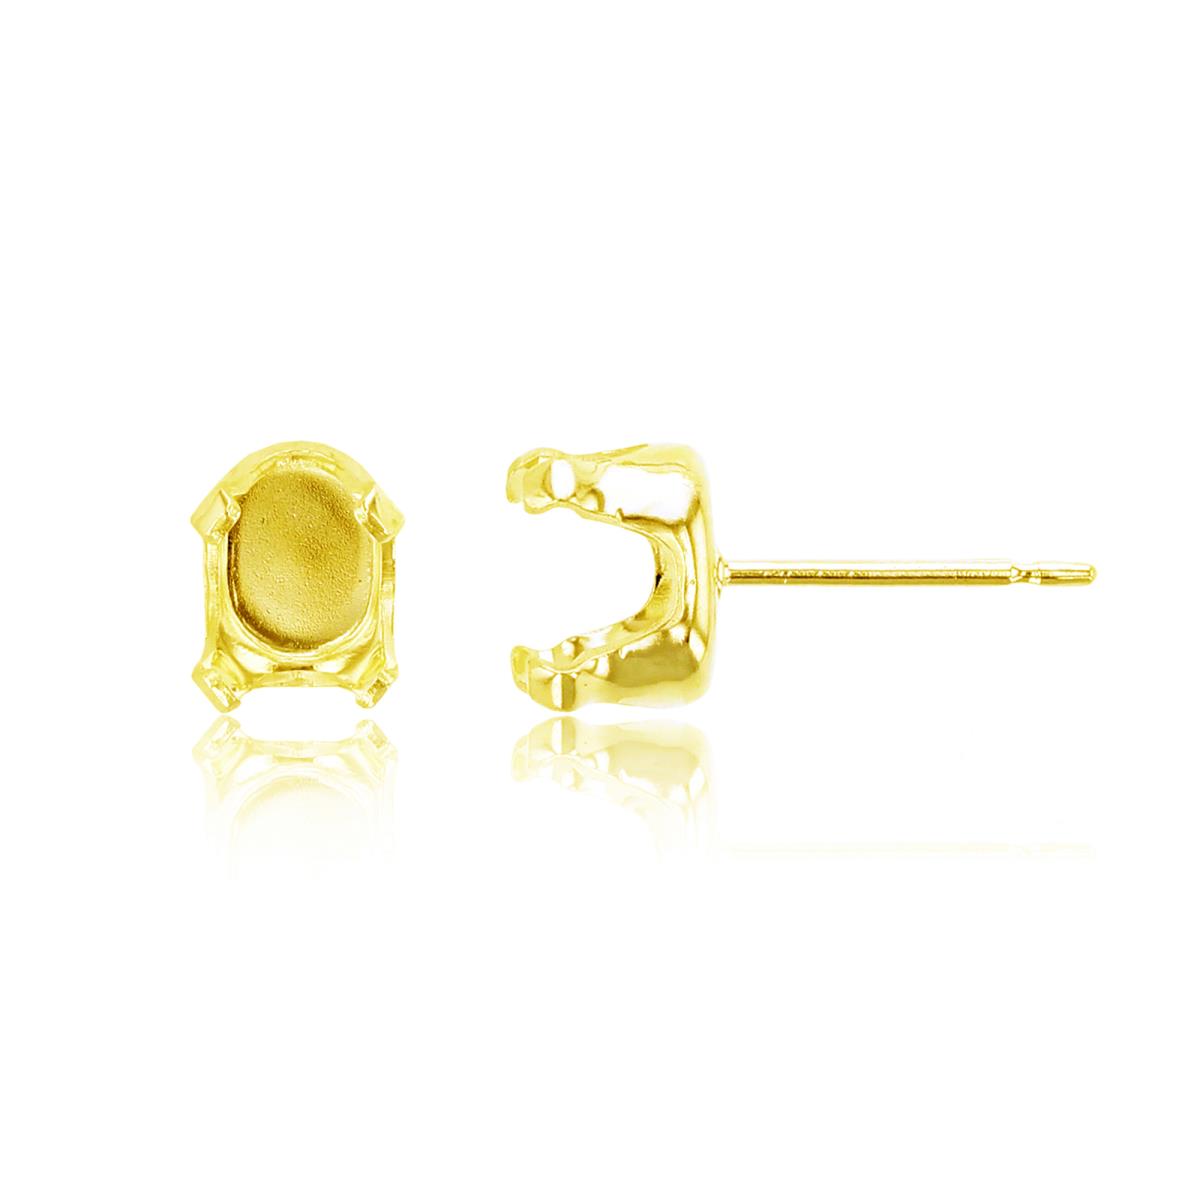 Sterling Silver Yellow 7x5mm Oval Prong Snap Stud Finding (PR)